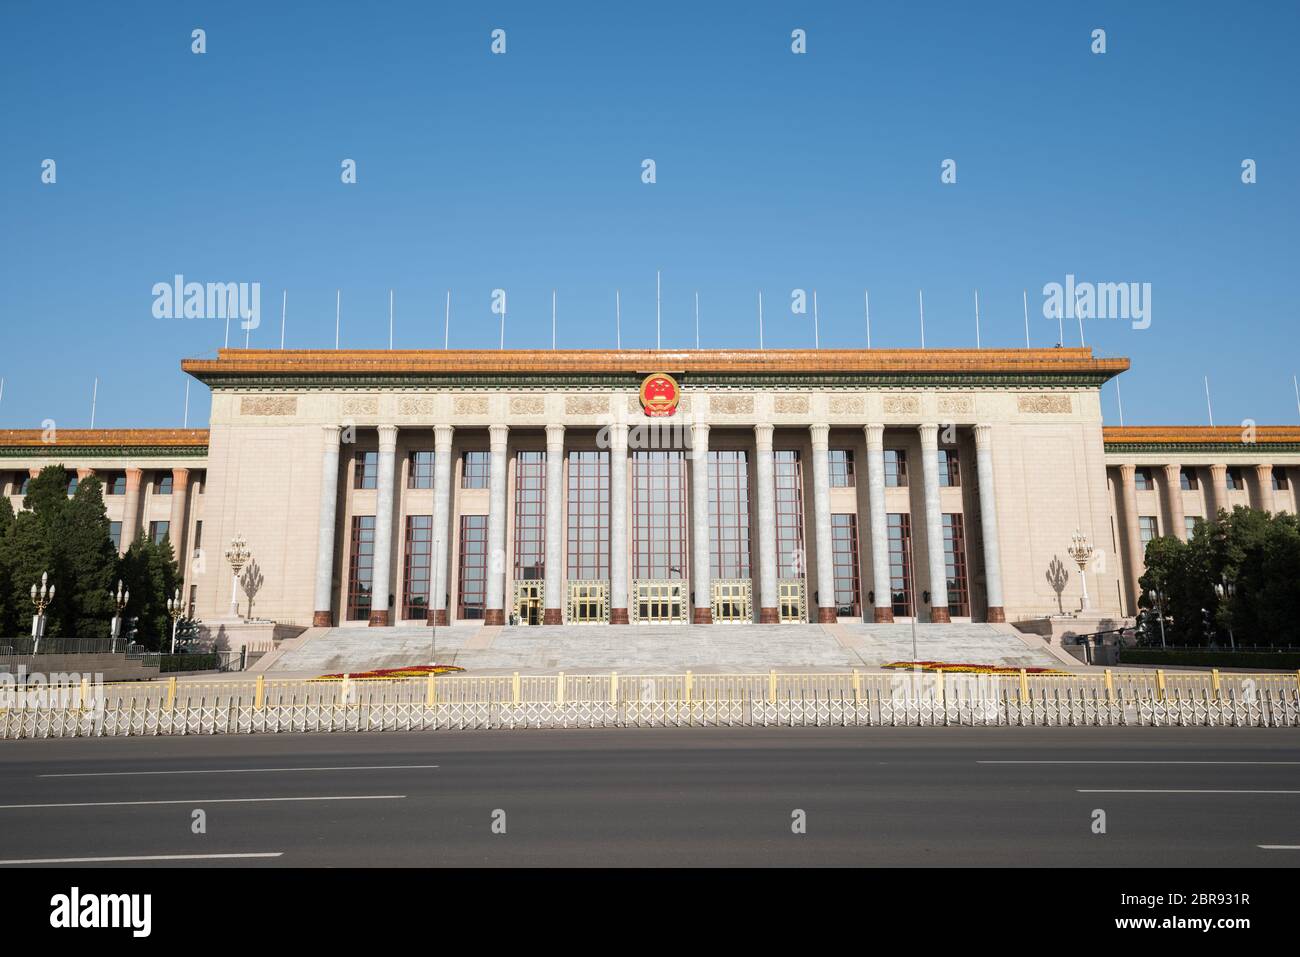 The Great Hall of the People, located at the east side of Tiananmen Square Stock Photo